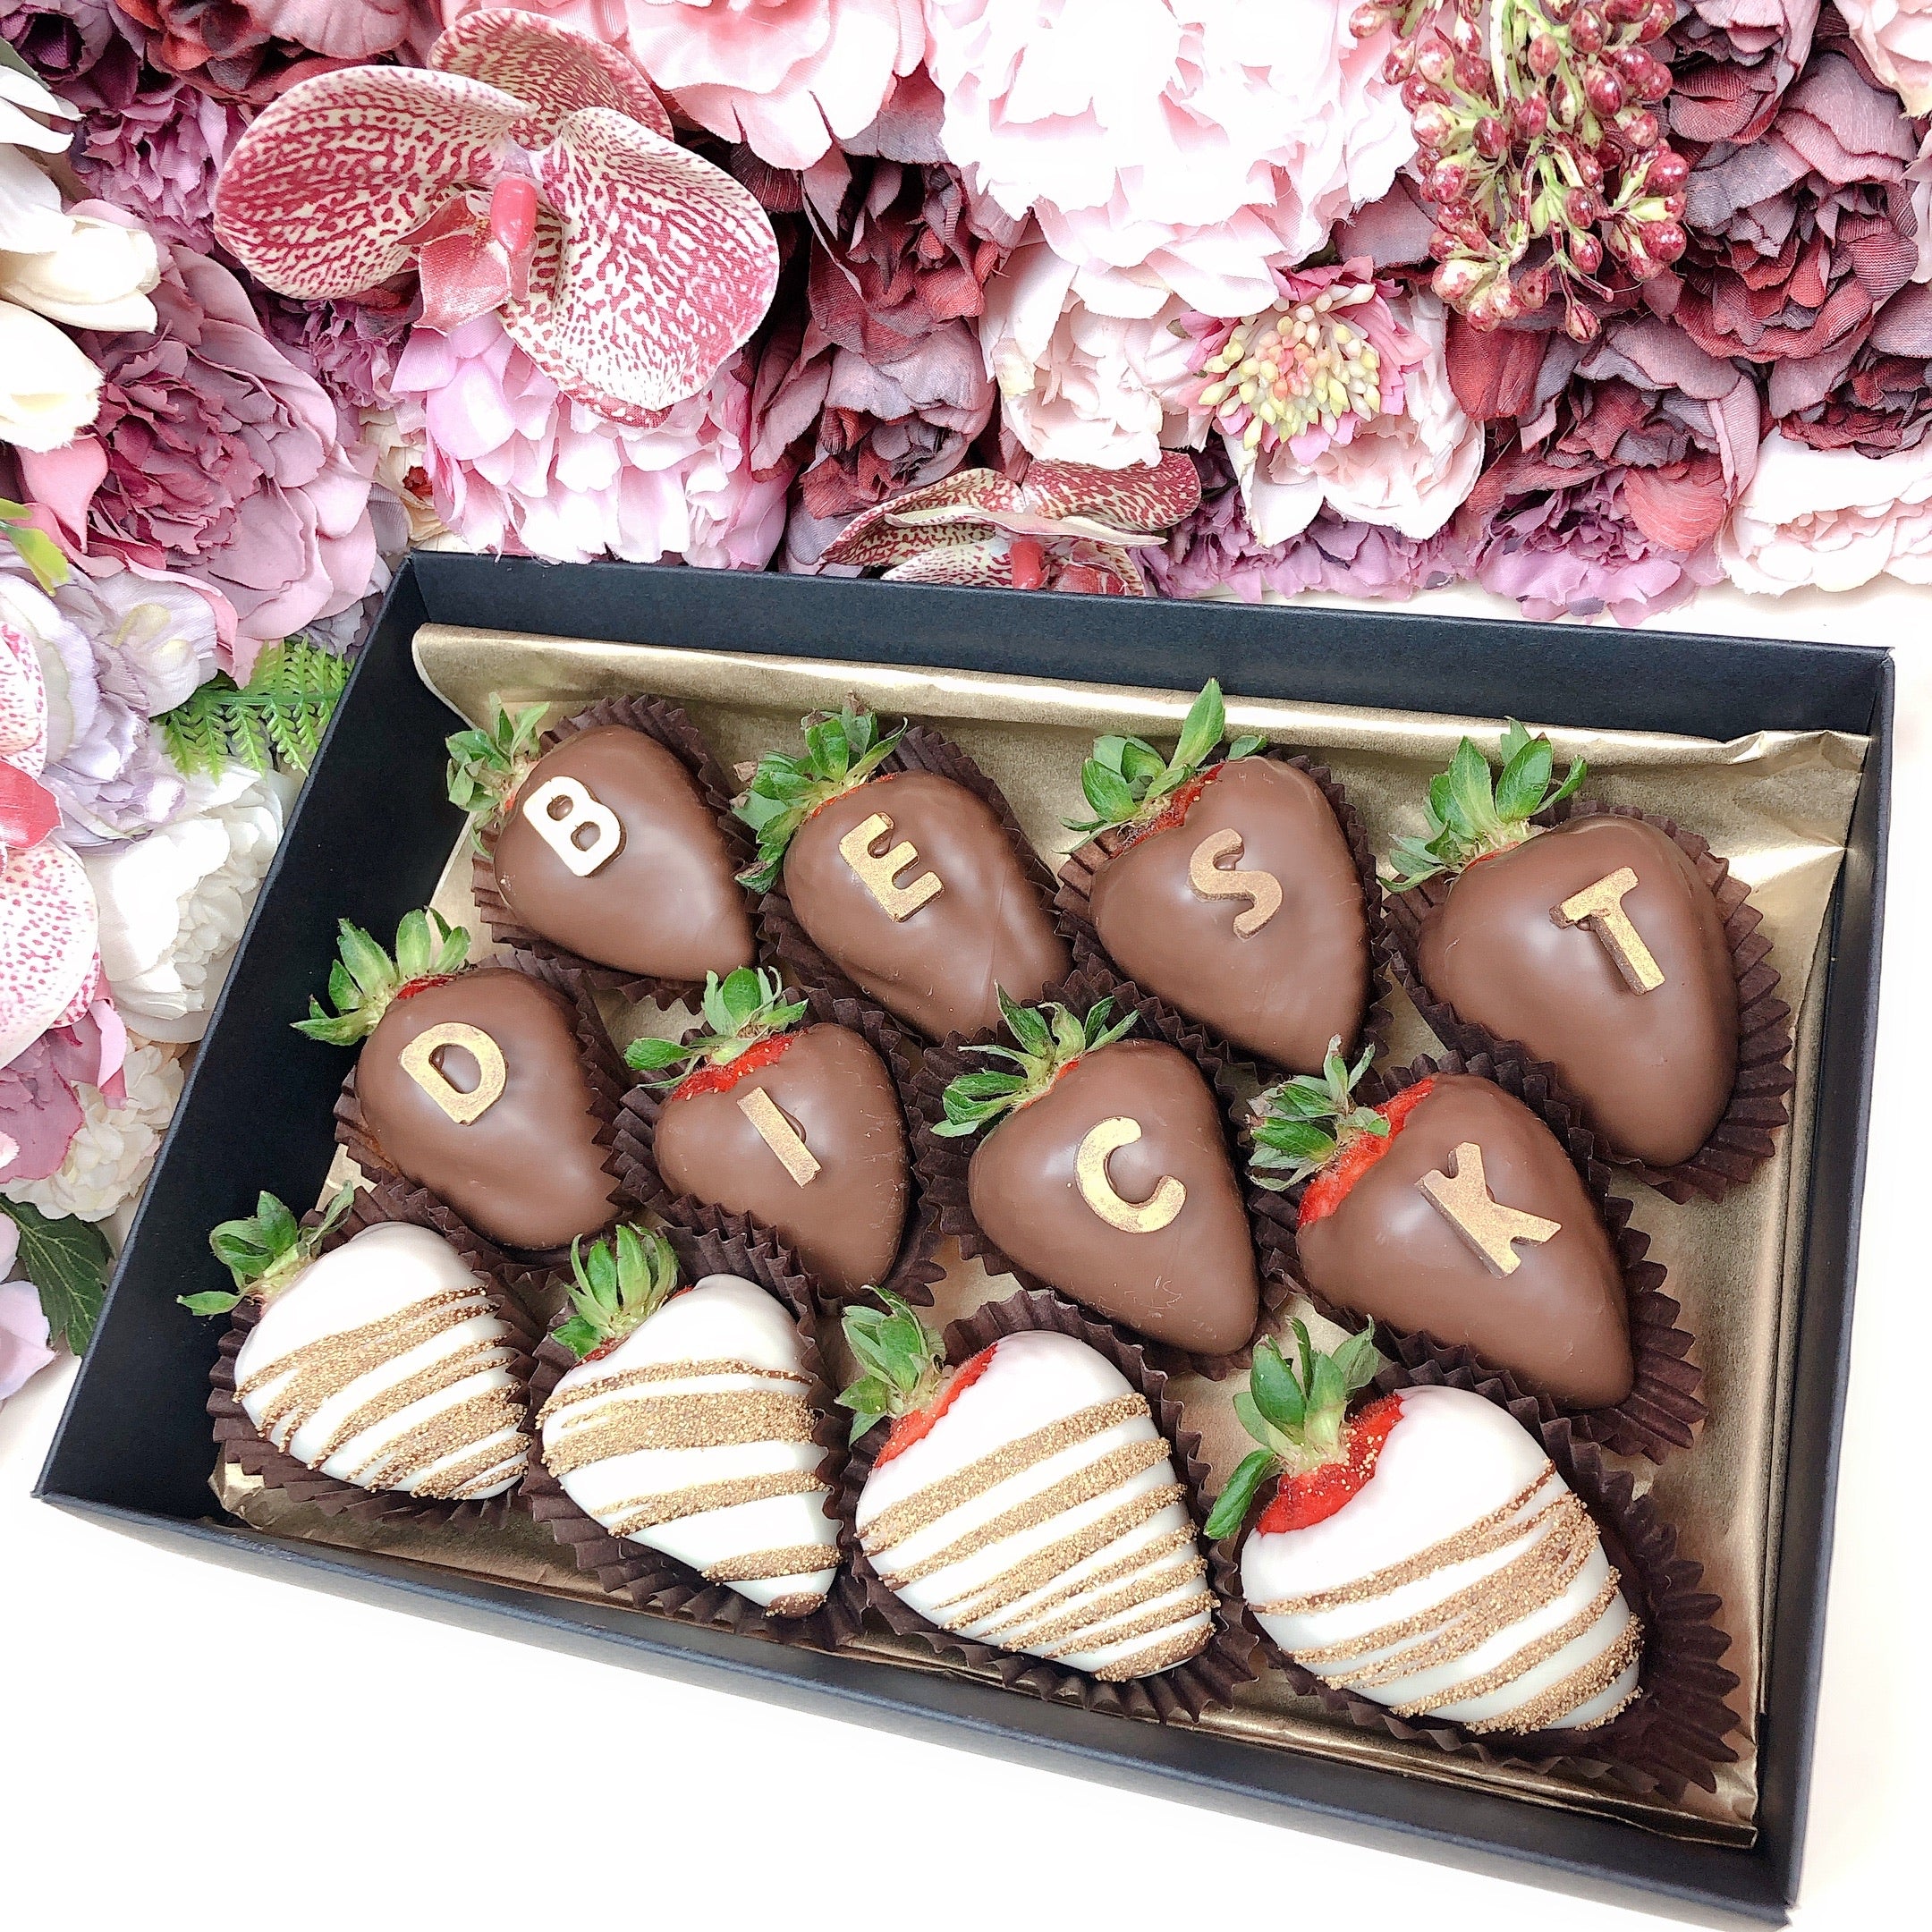 Best Dick chocolate covered strawberries for your man, best gifts for him, cheaky gift for your man 